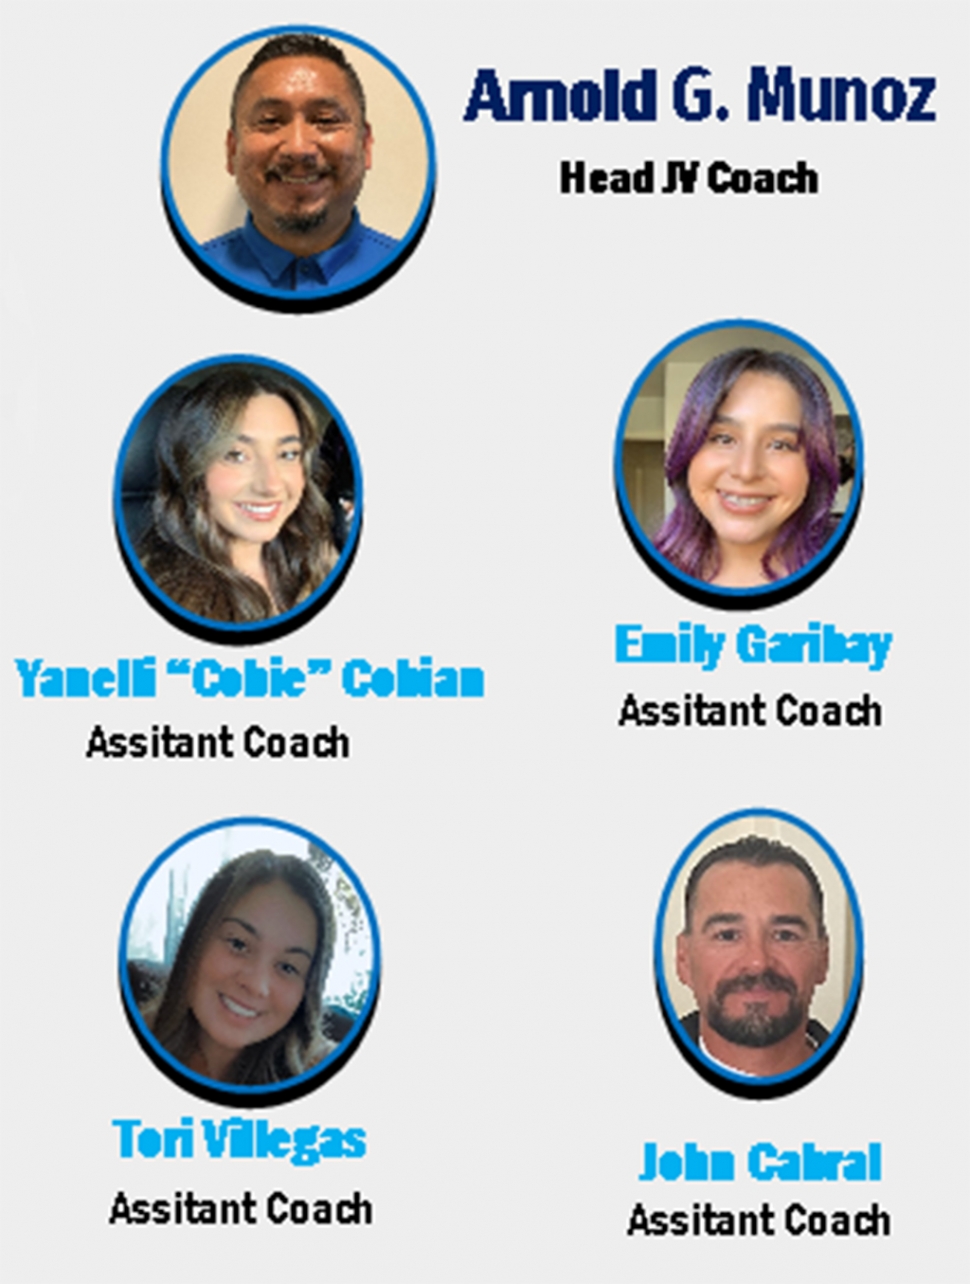 Above are the rest of the Fillmore Flashes Soccer Coaches as mentioned in last week’s edition. Top Row: Arnold G. Munoz, Head JV Coach; Middle Row: Assistant Coaches Yanelli “Cobie” Cobian, and Emily Garibay; Bottom Row:  Assistant Coaches Tori Villegas, and John Cabral. Courtesy Jr. Lomeli, Head Varsity Coach.